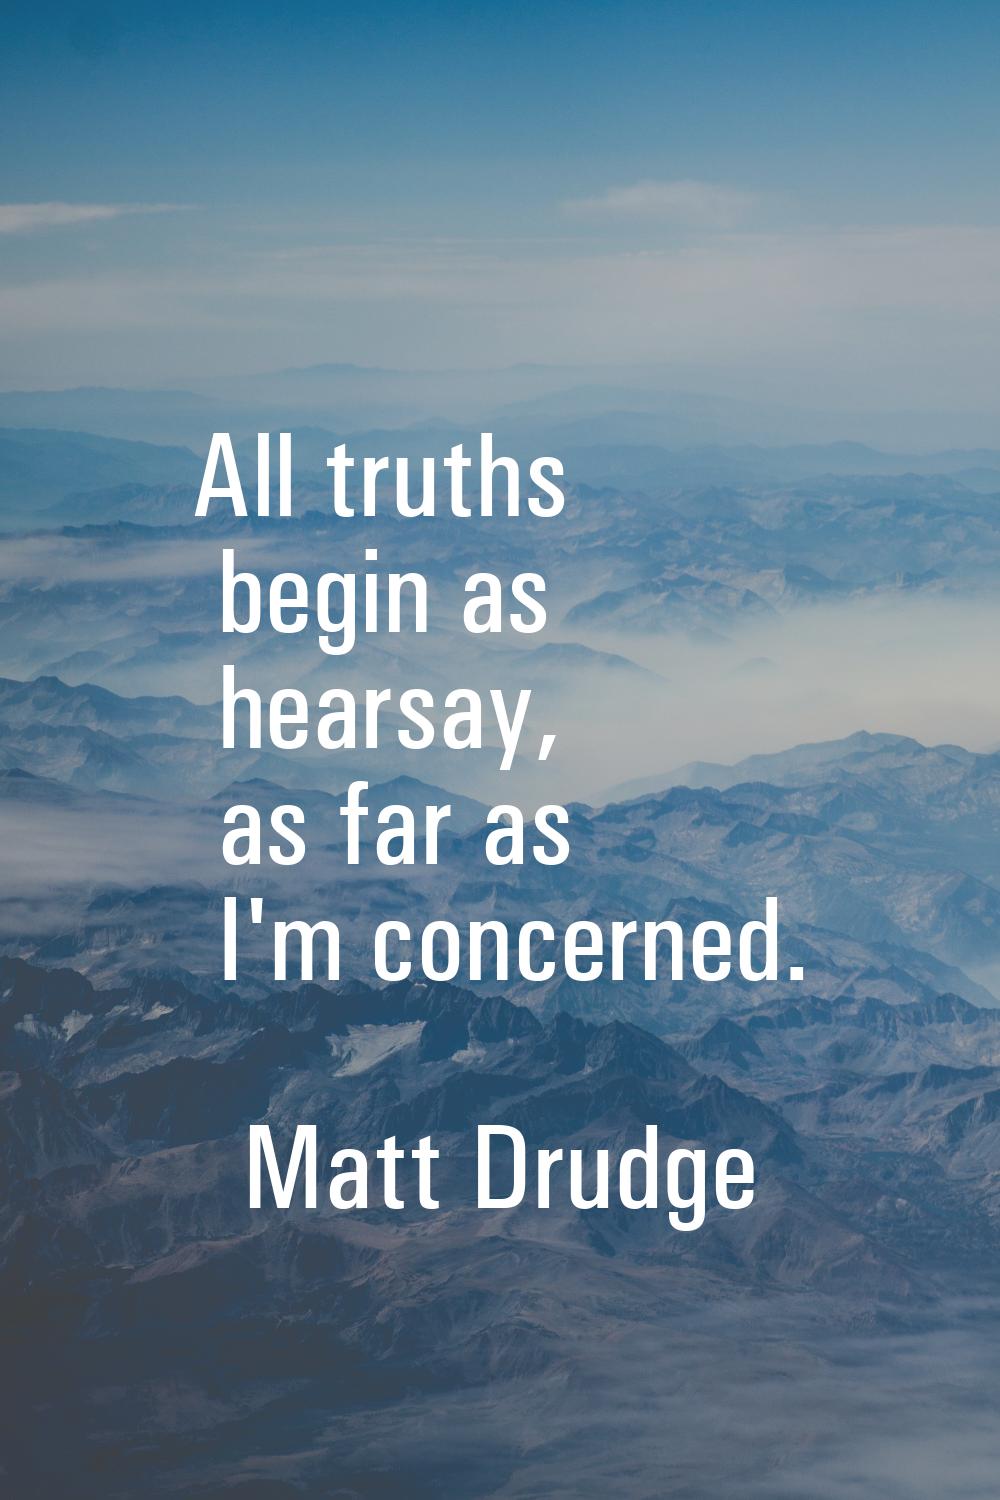 All truths begin as hearsay, as far as I'm concerned.